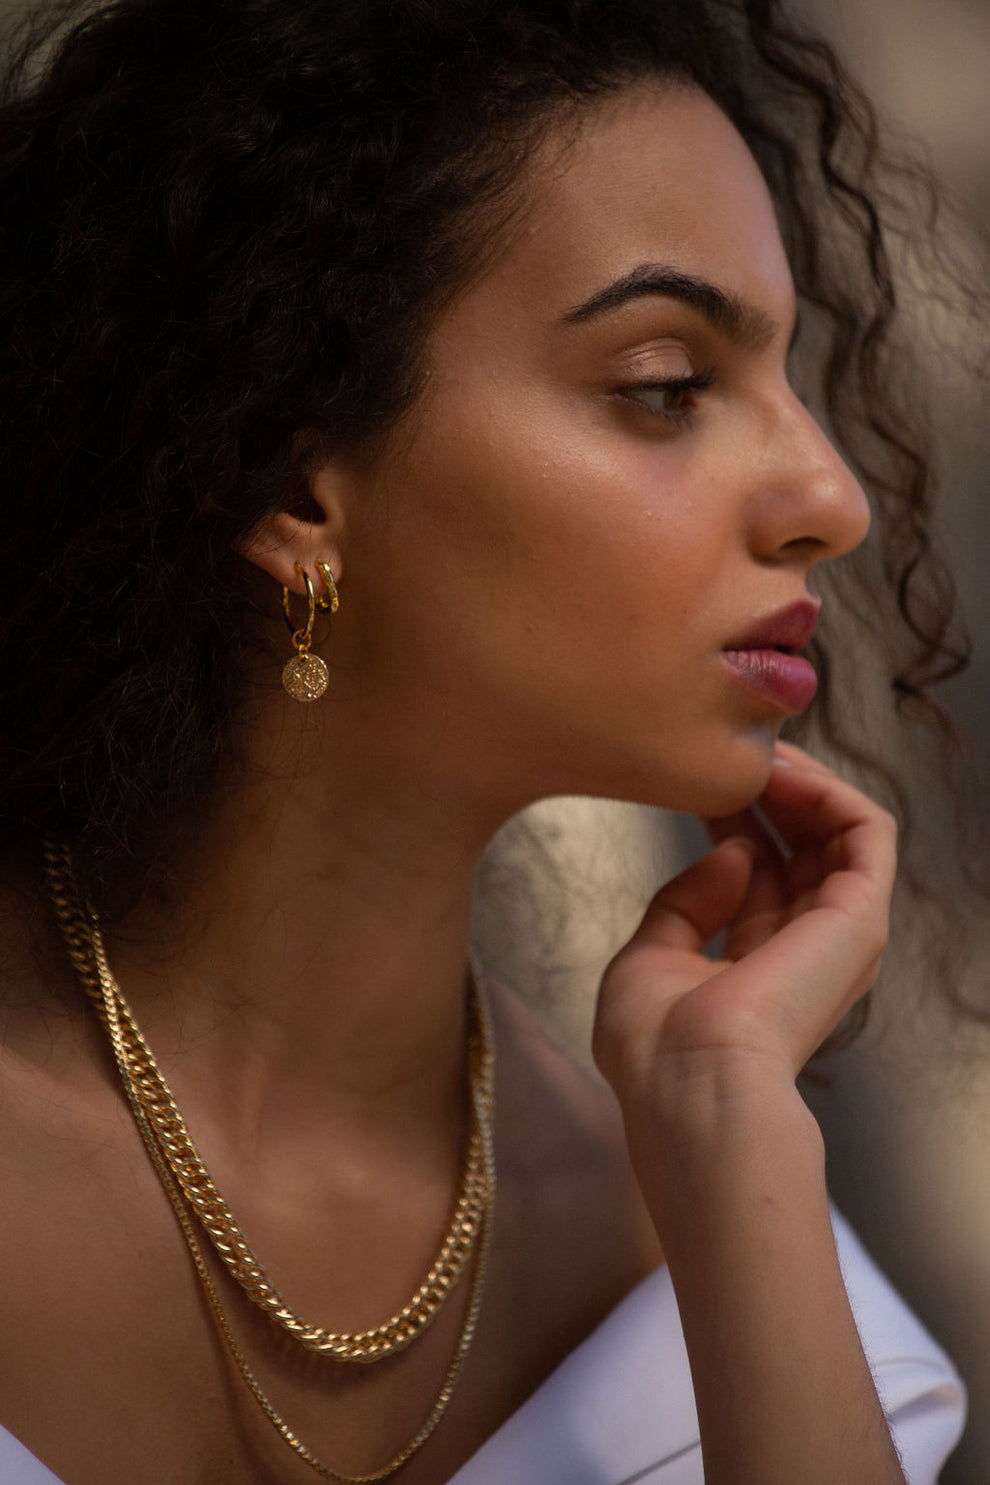 Bora Textured Oval Hoops - Gold Plating